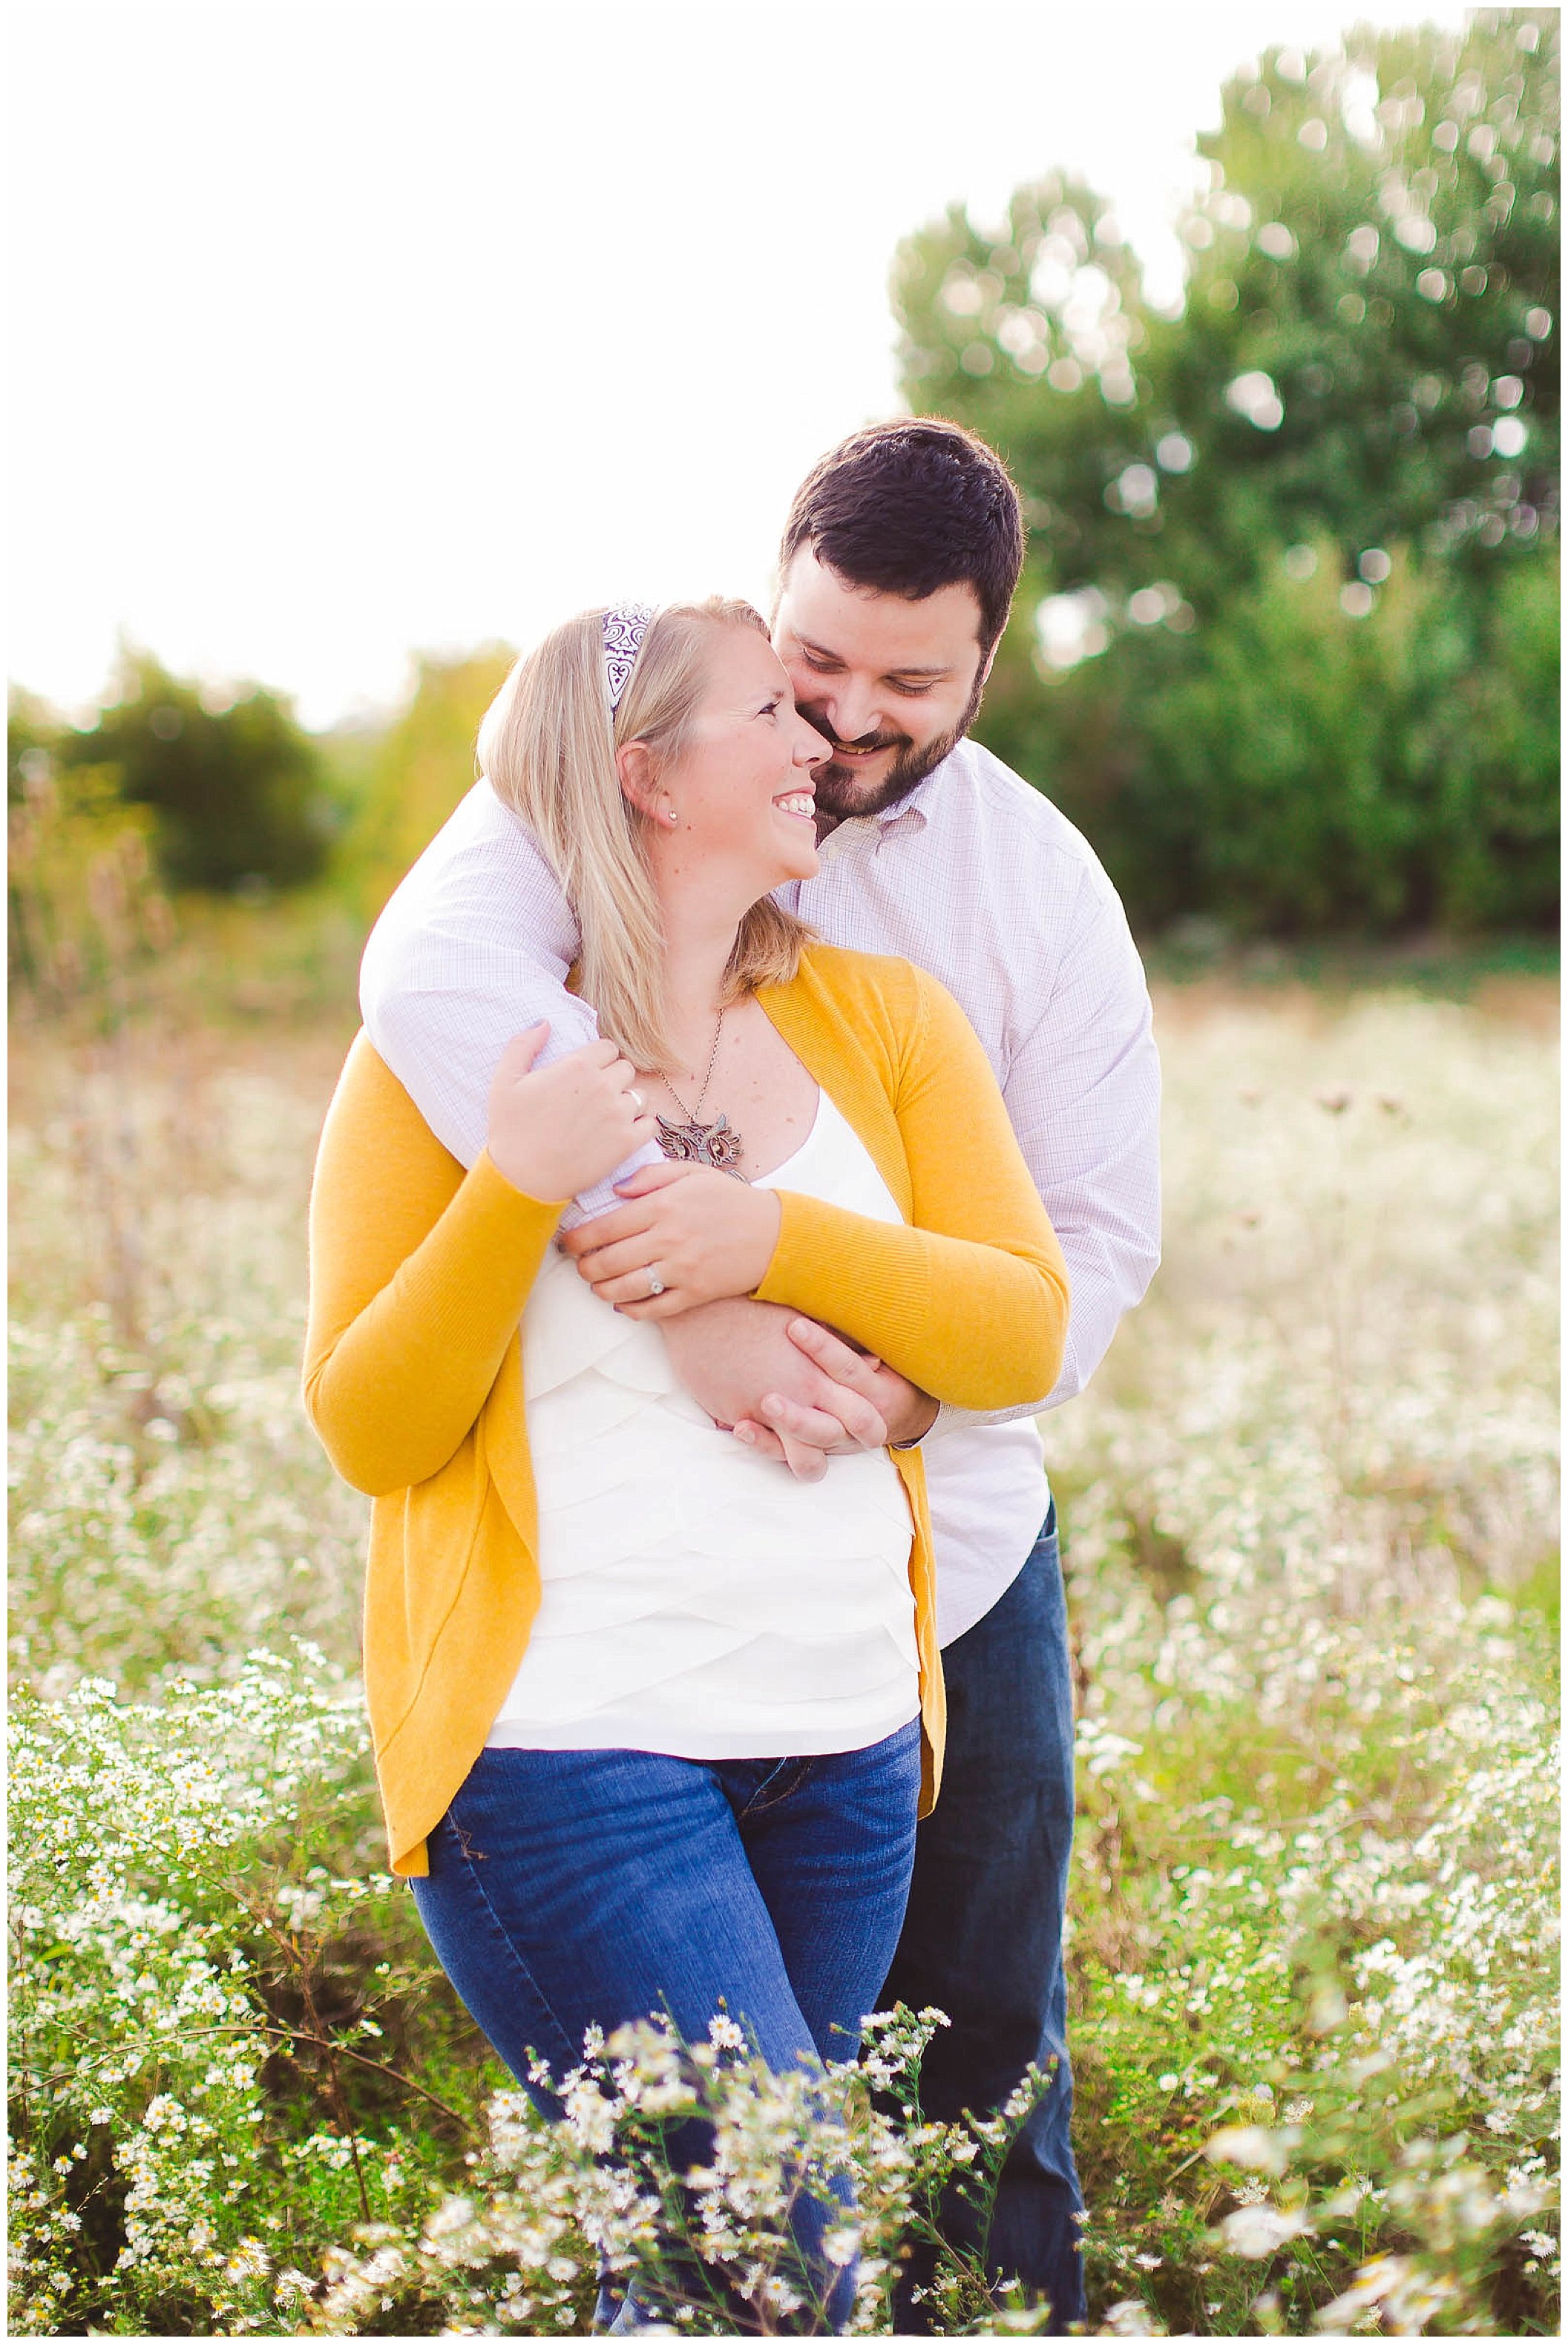 Sunshine filled engagement session in a field of wildflowers, Fort Wayne Indiana Wedding Photographer_0014.jpg